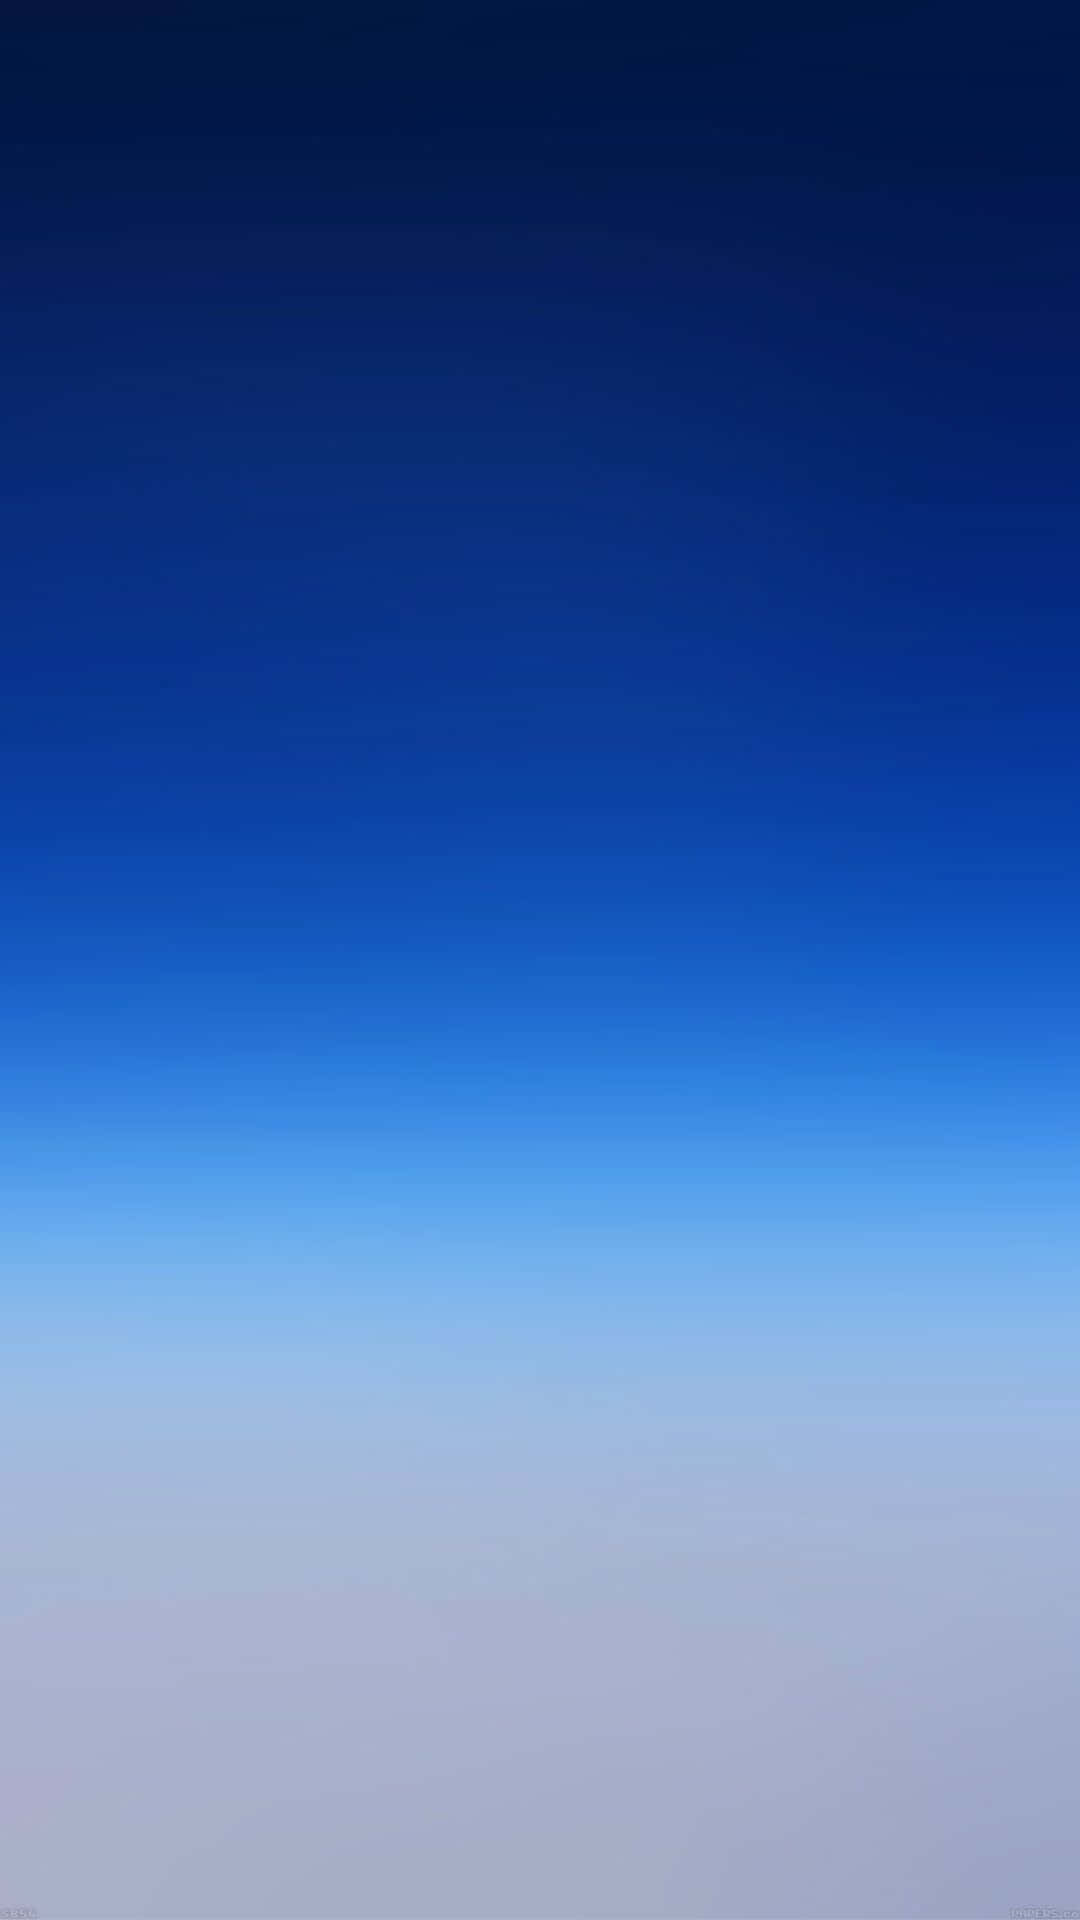 Superb Gray And Blue Gradient Background